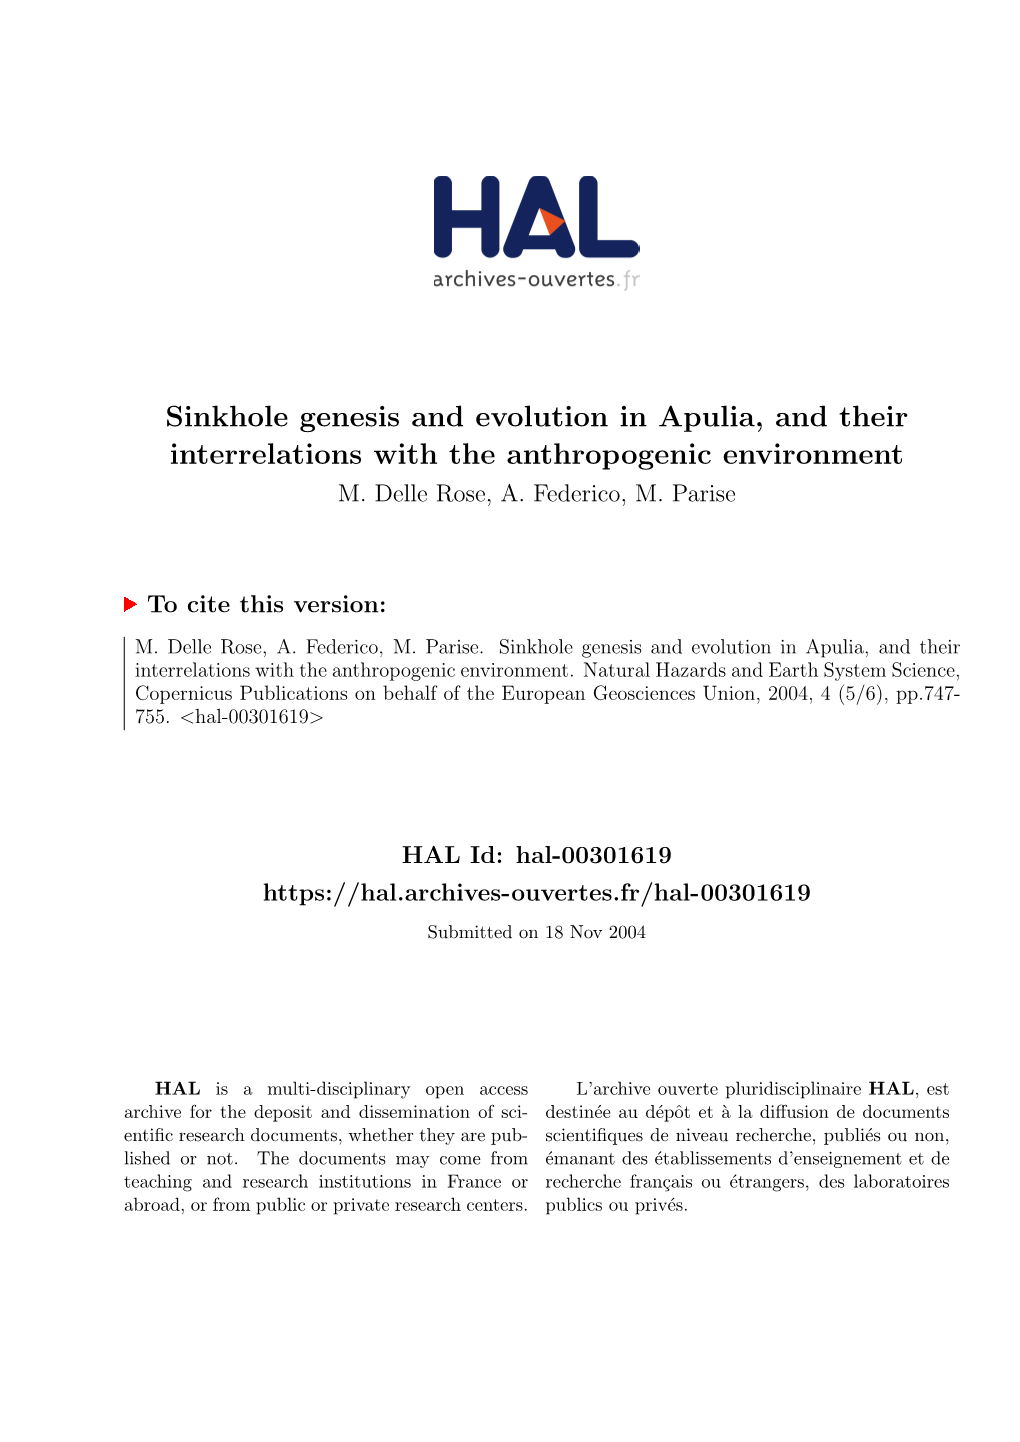 Sinkhole Genesis and Evolution in Apulia, and Their Interrelations with the Anthropogenic Environment M